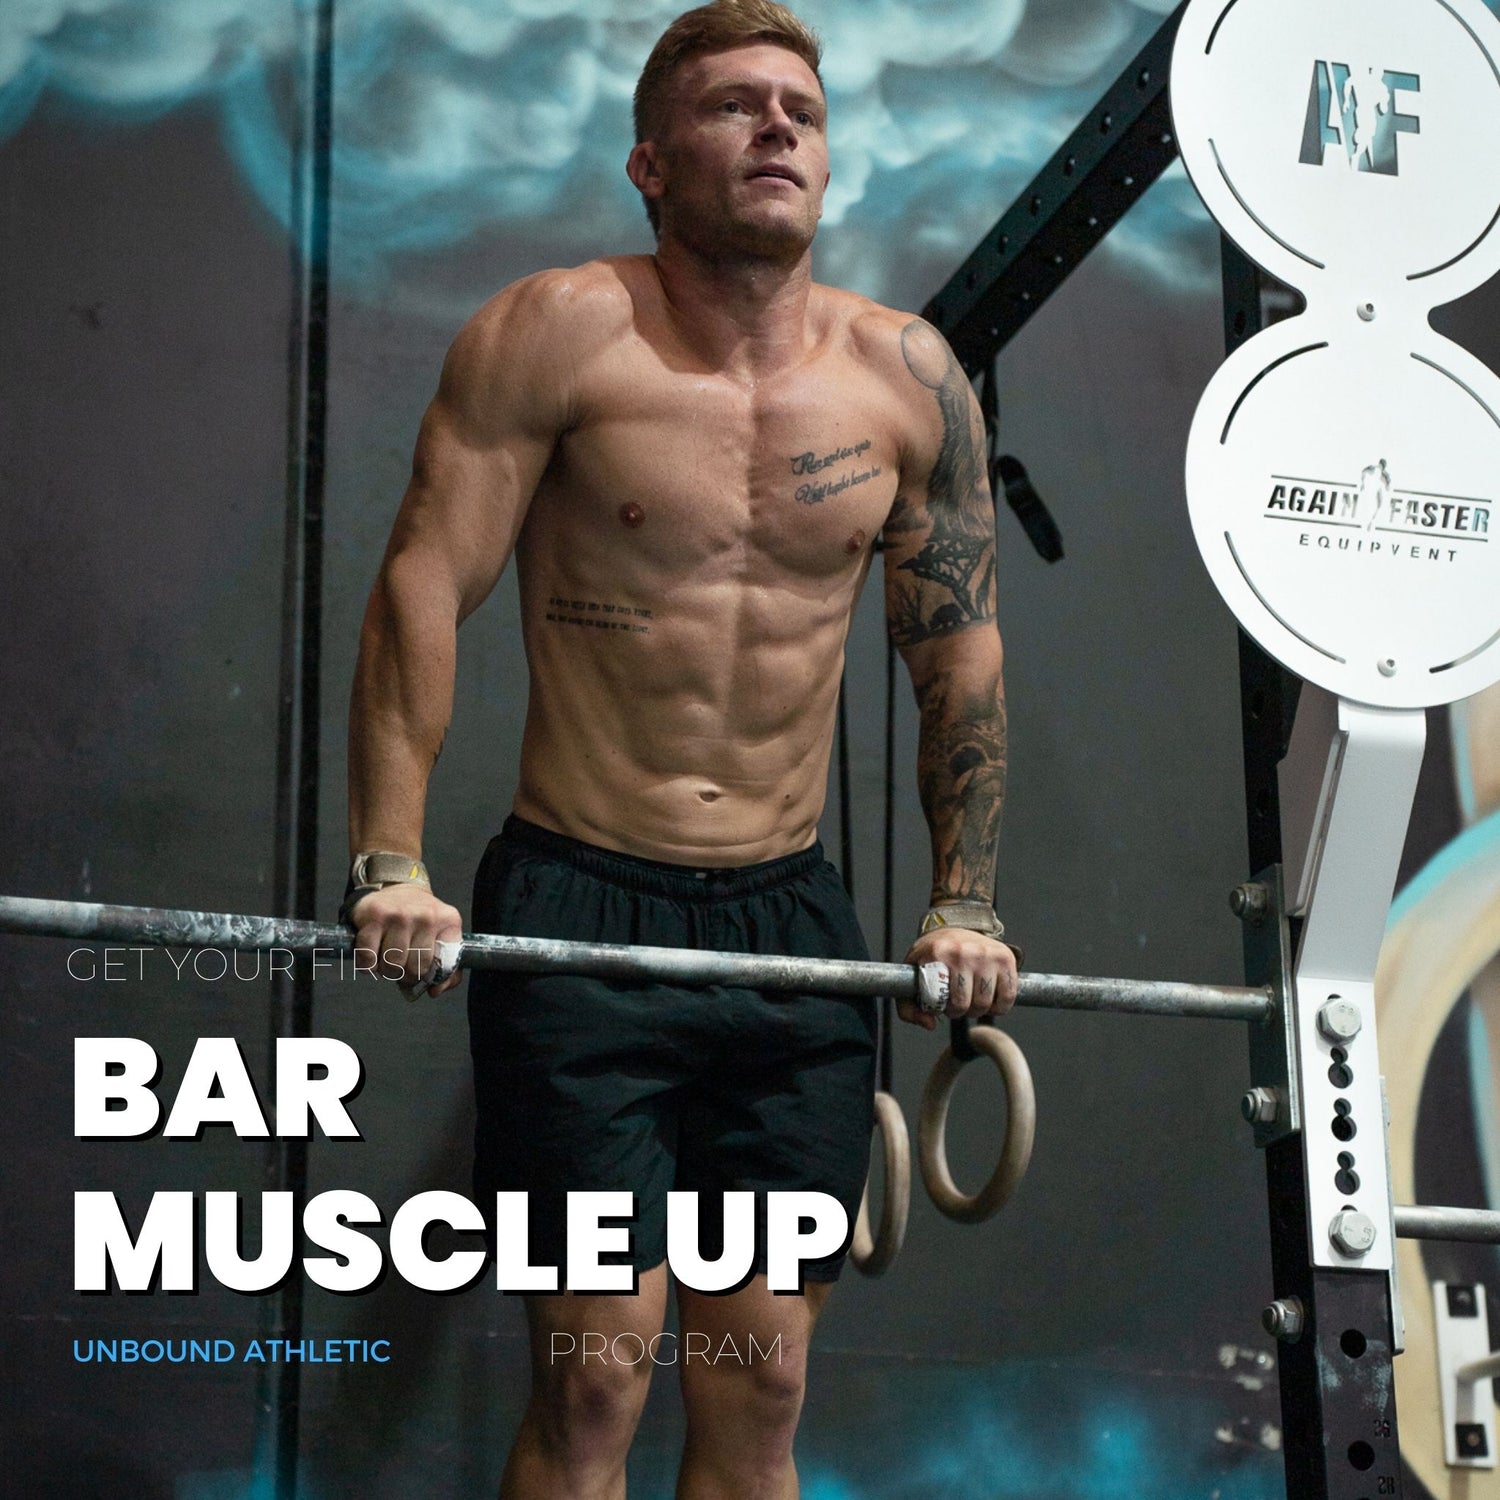 Get Your First Bar Muscle Up Program